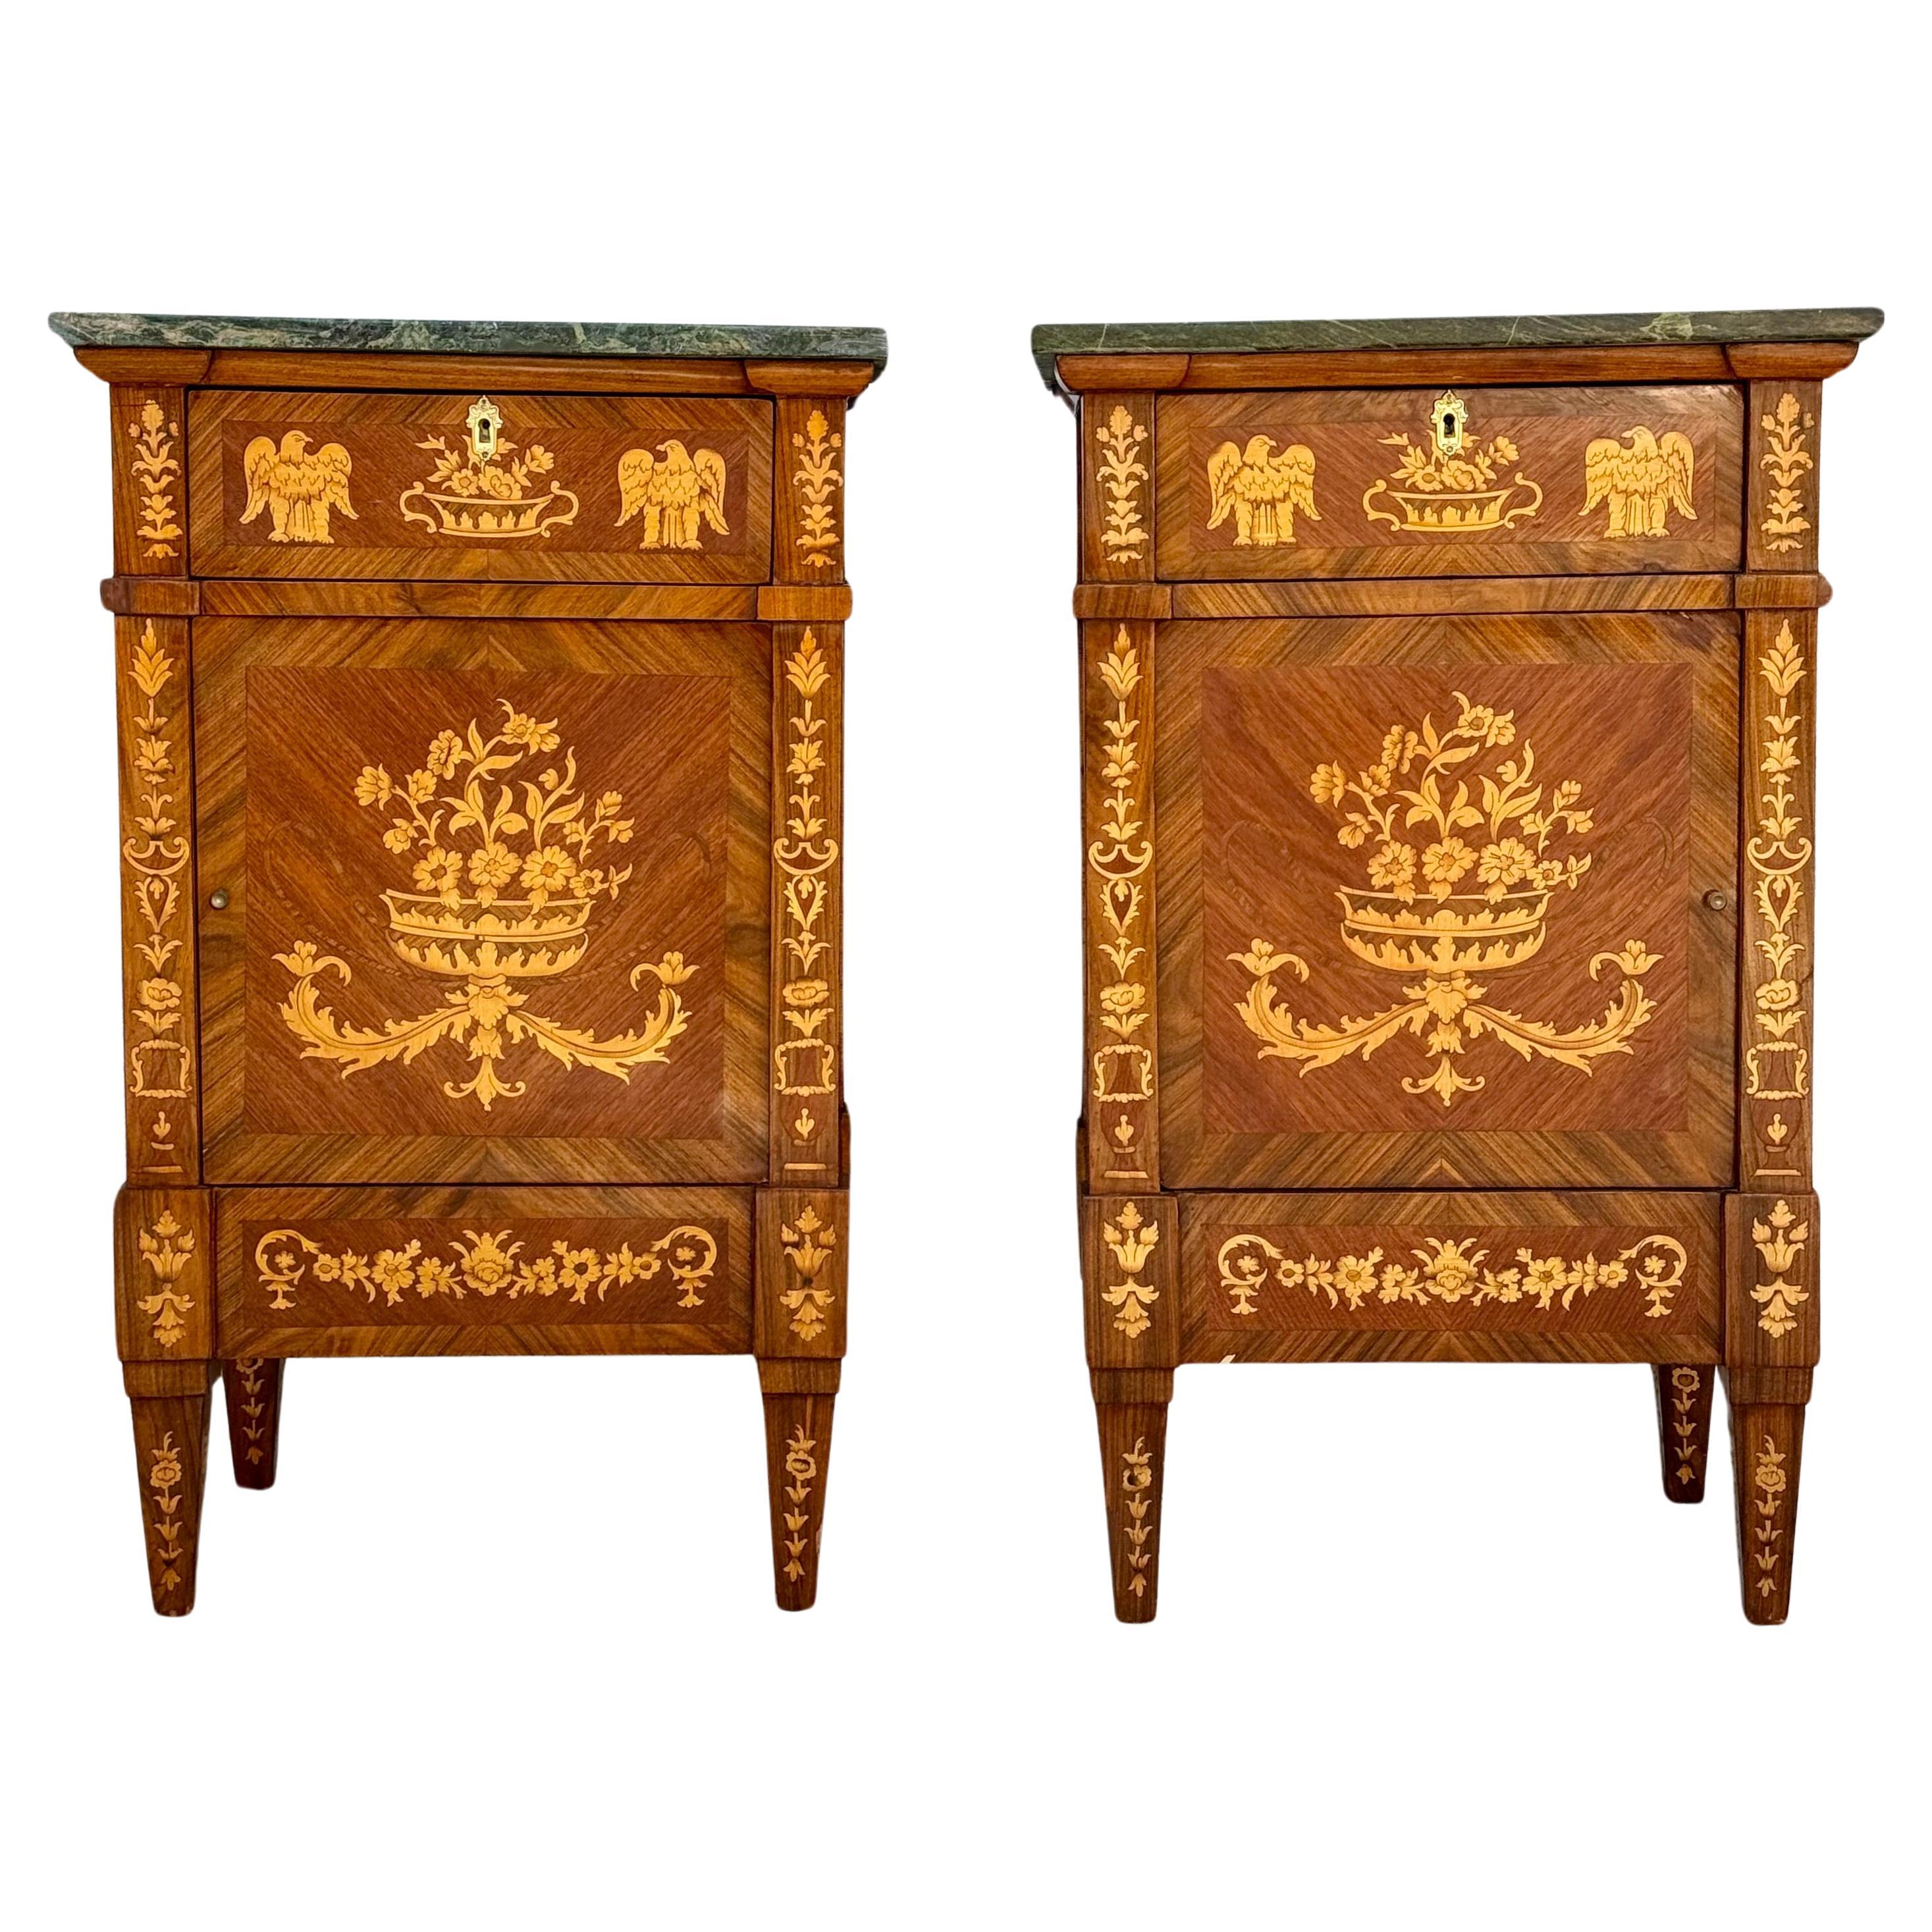 Pair of early 20th century Italian Maggiolini Style bedside chests with marble tops. Chests feature beautiful urns with eagle, floral and foliage designs. Each chest has a top drawer above a square door and stand on tall fluted legs. Elegant and